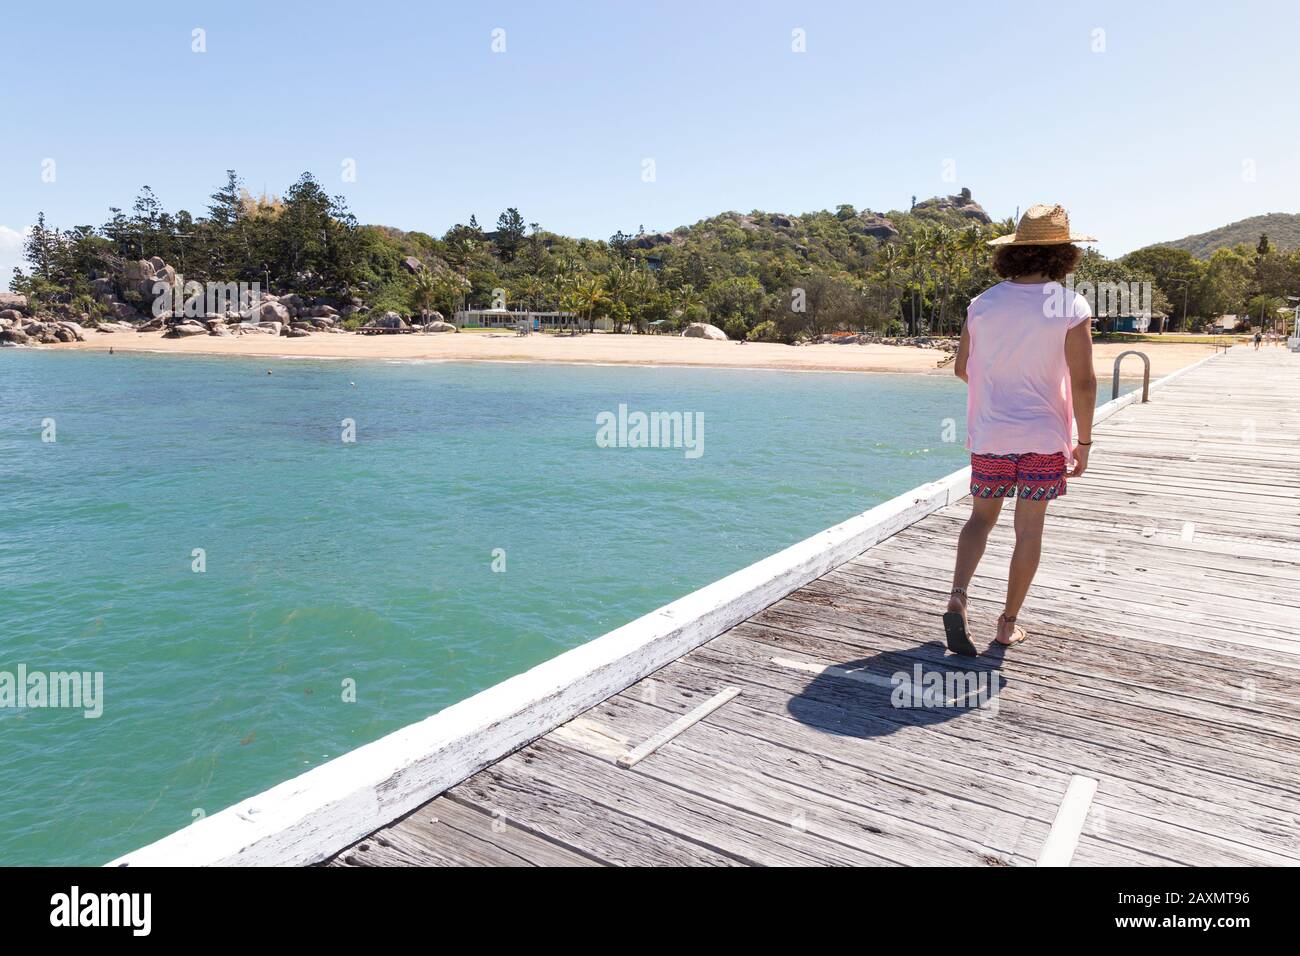 Curly hair man, with sun hat, walking on wooden dock of Magnetic Is. Stock Photo